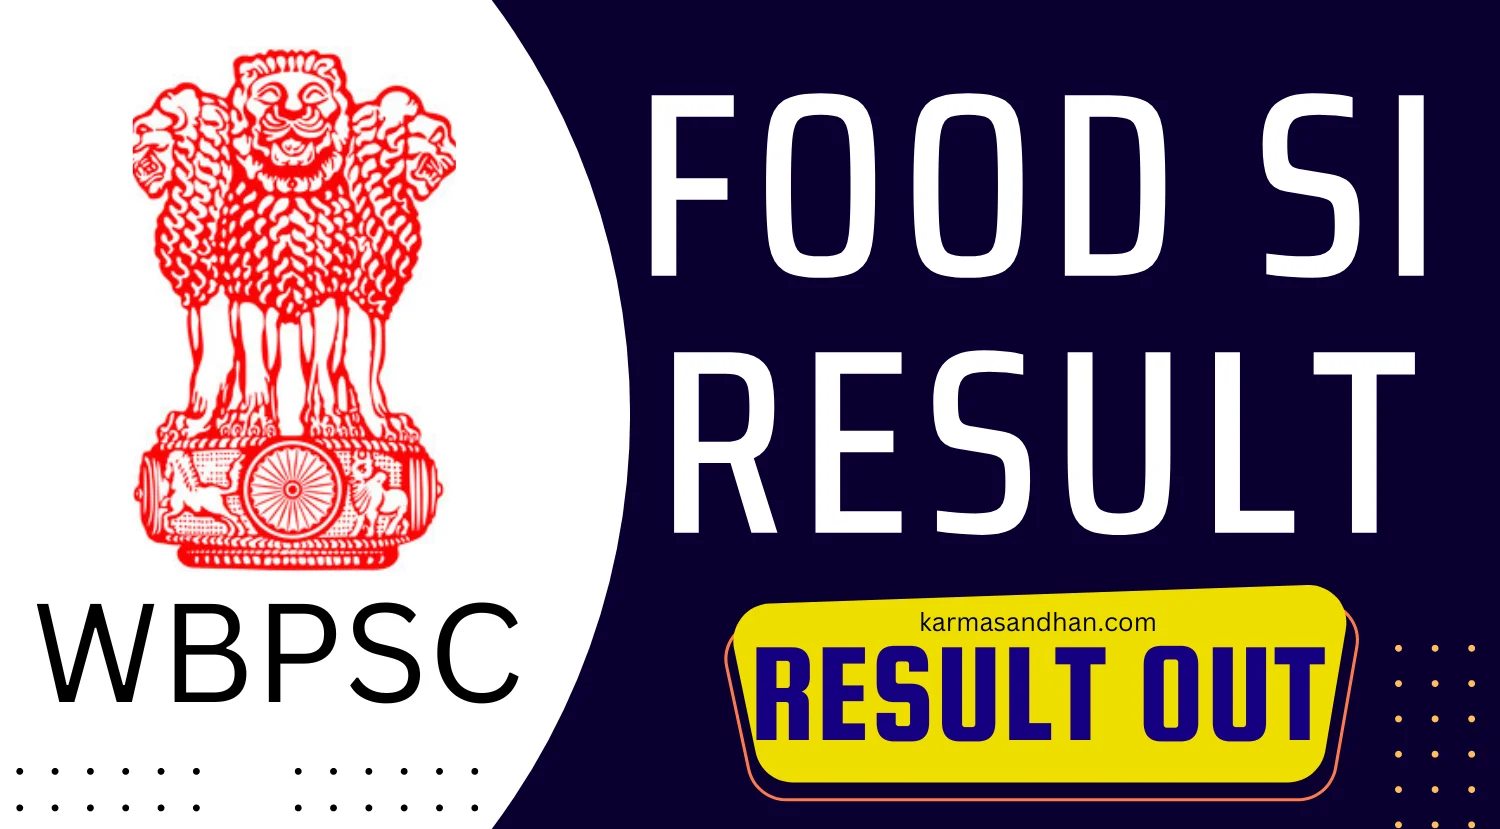 WBPSC FOOD SI Result OUT, Check Result PDF Here Now